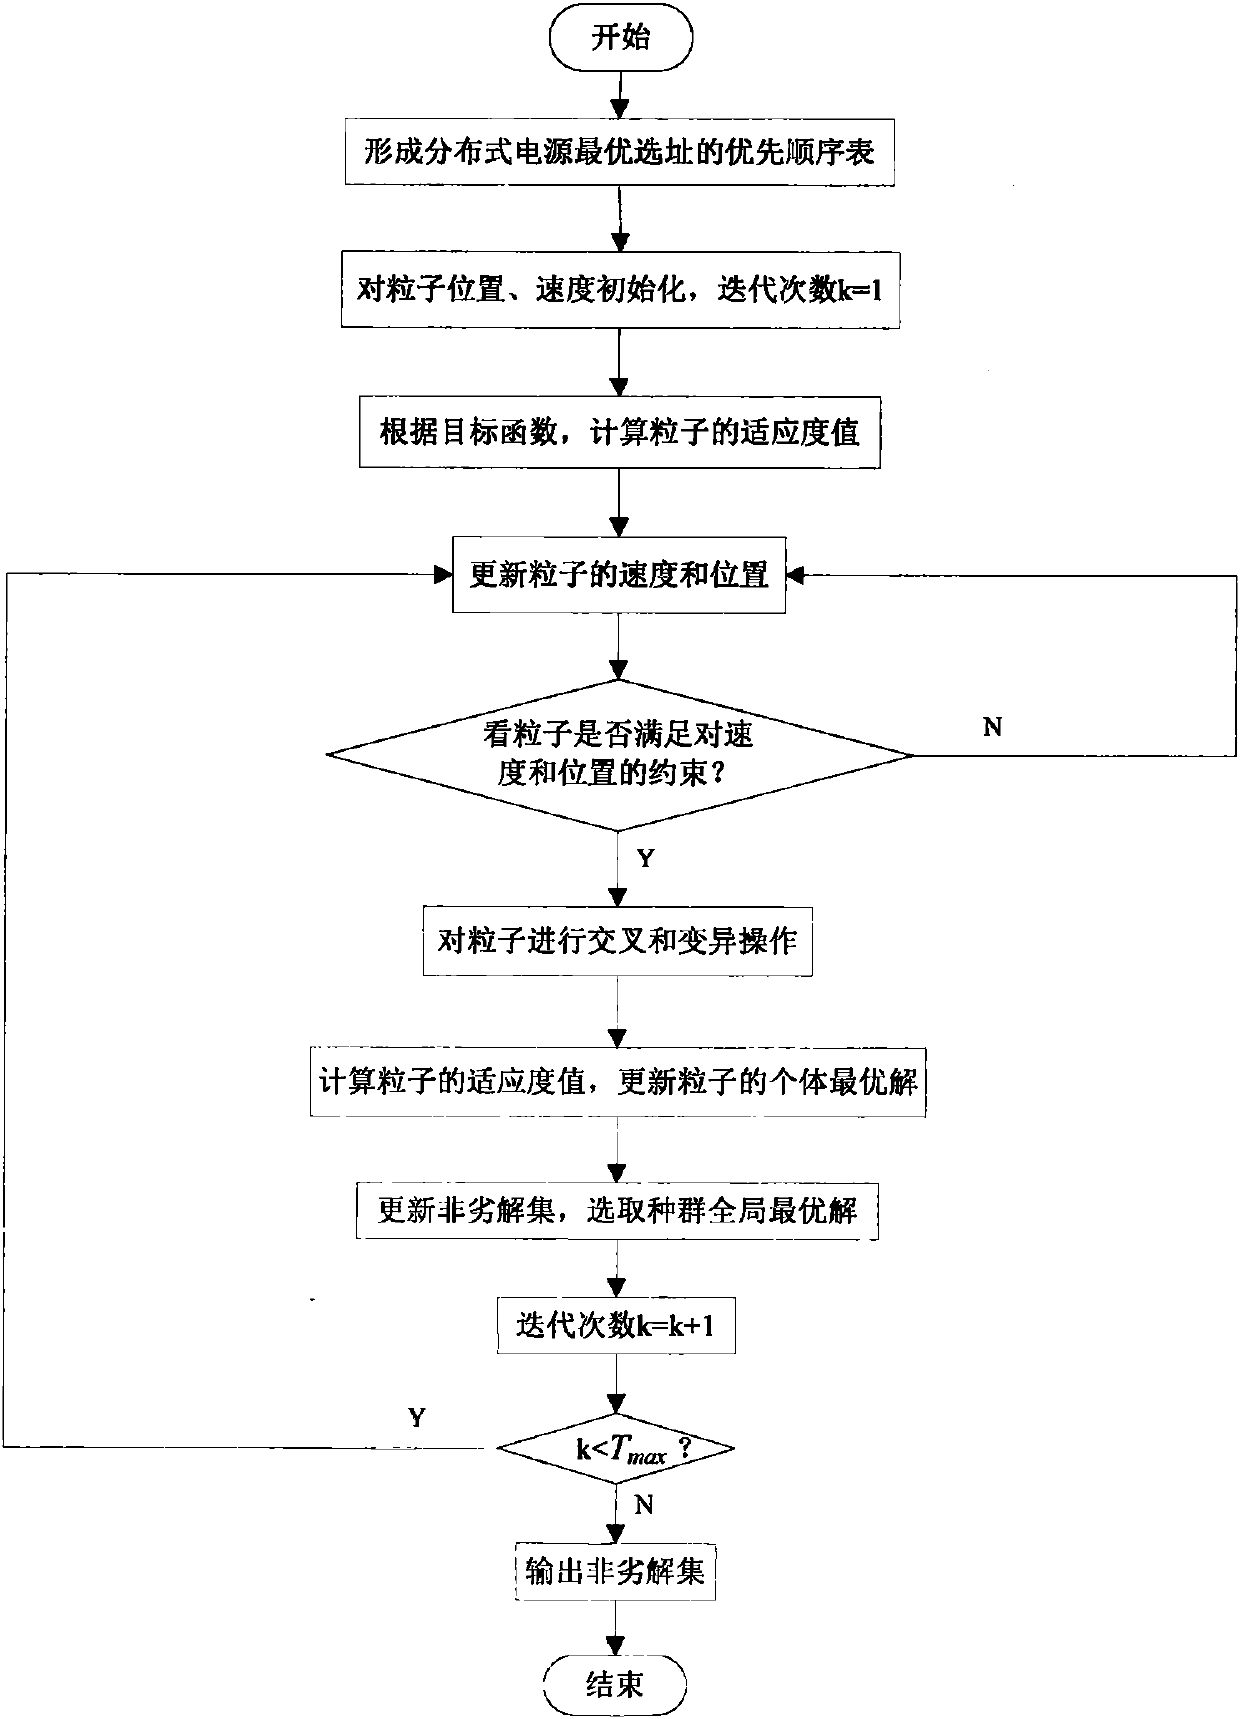 Active distribution network distributed power planning method in consideration of energy storage and reactive power compensation